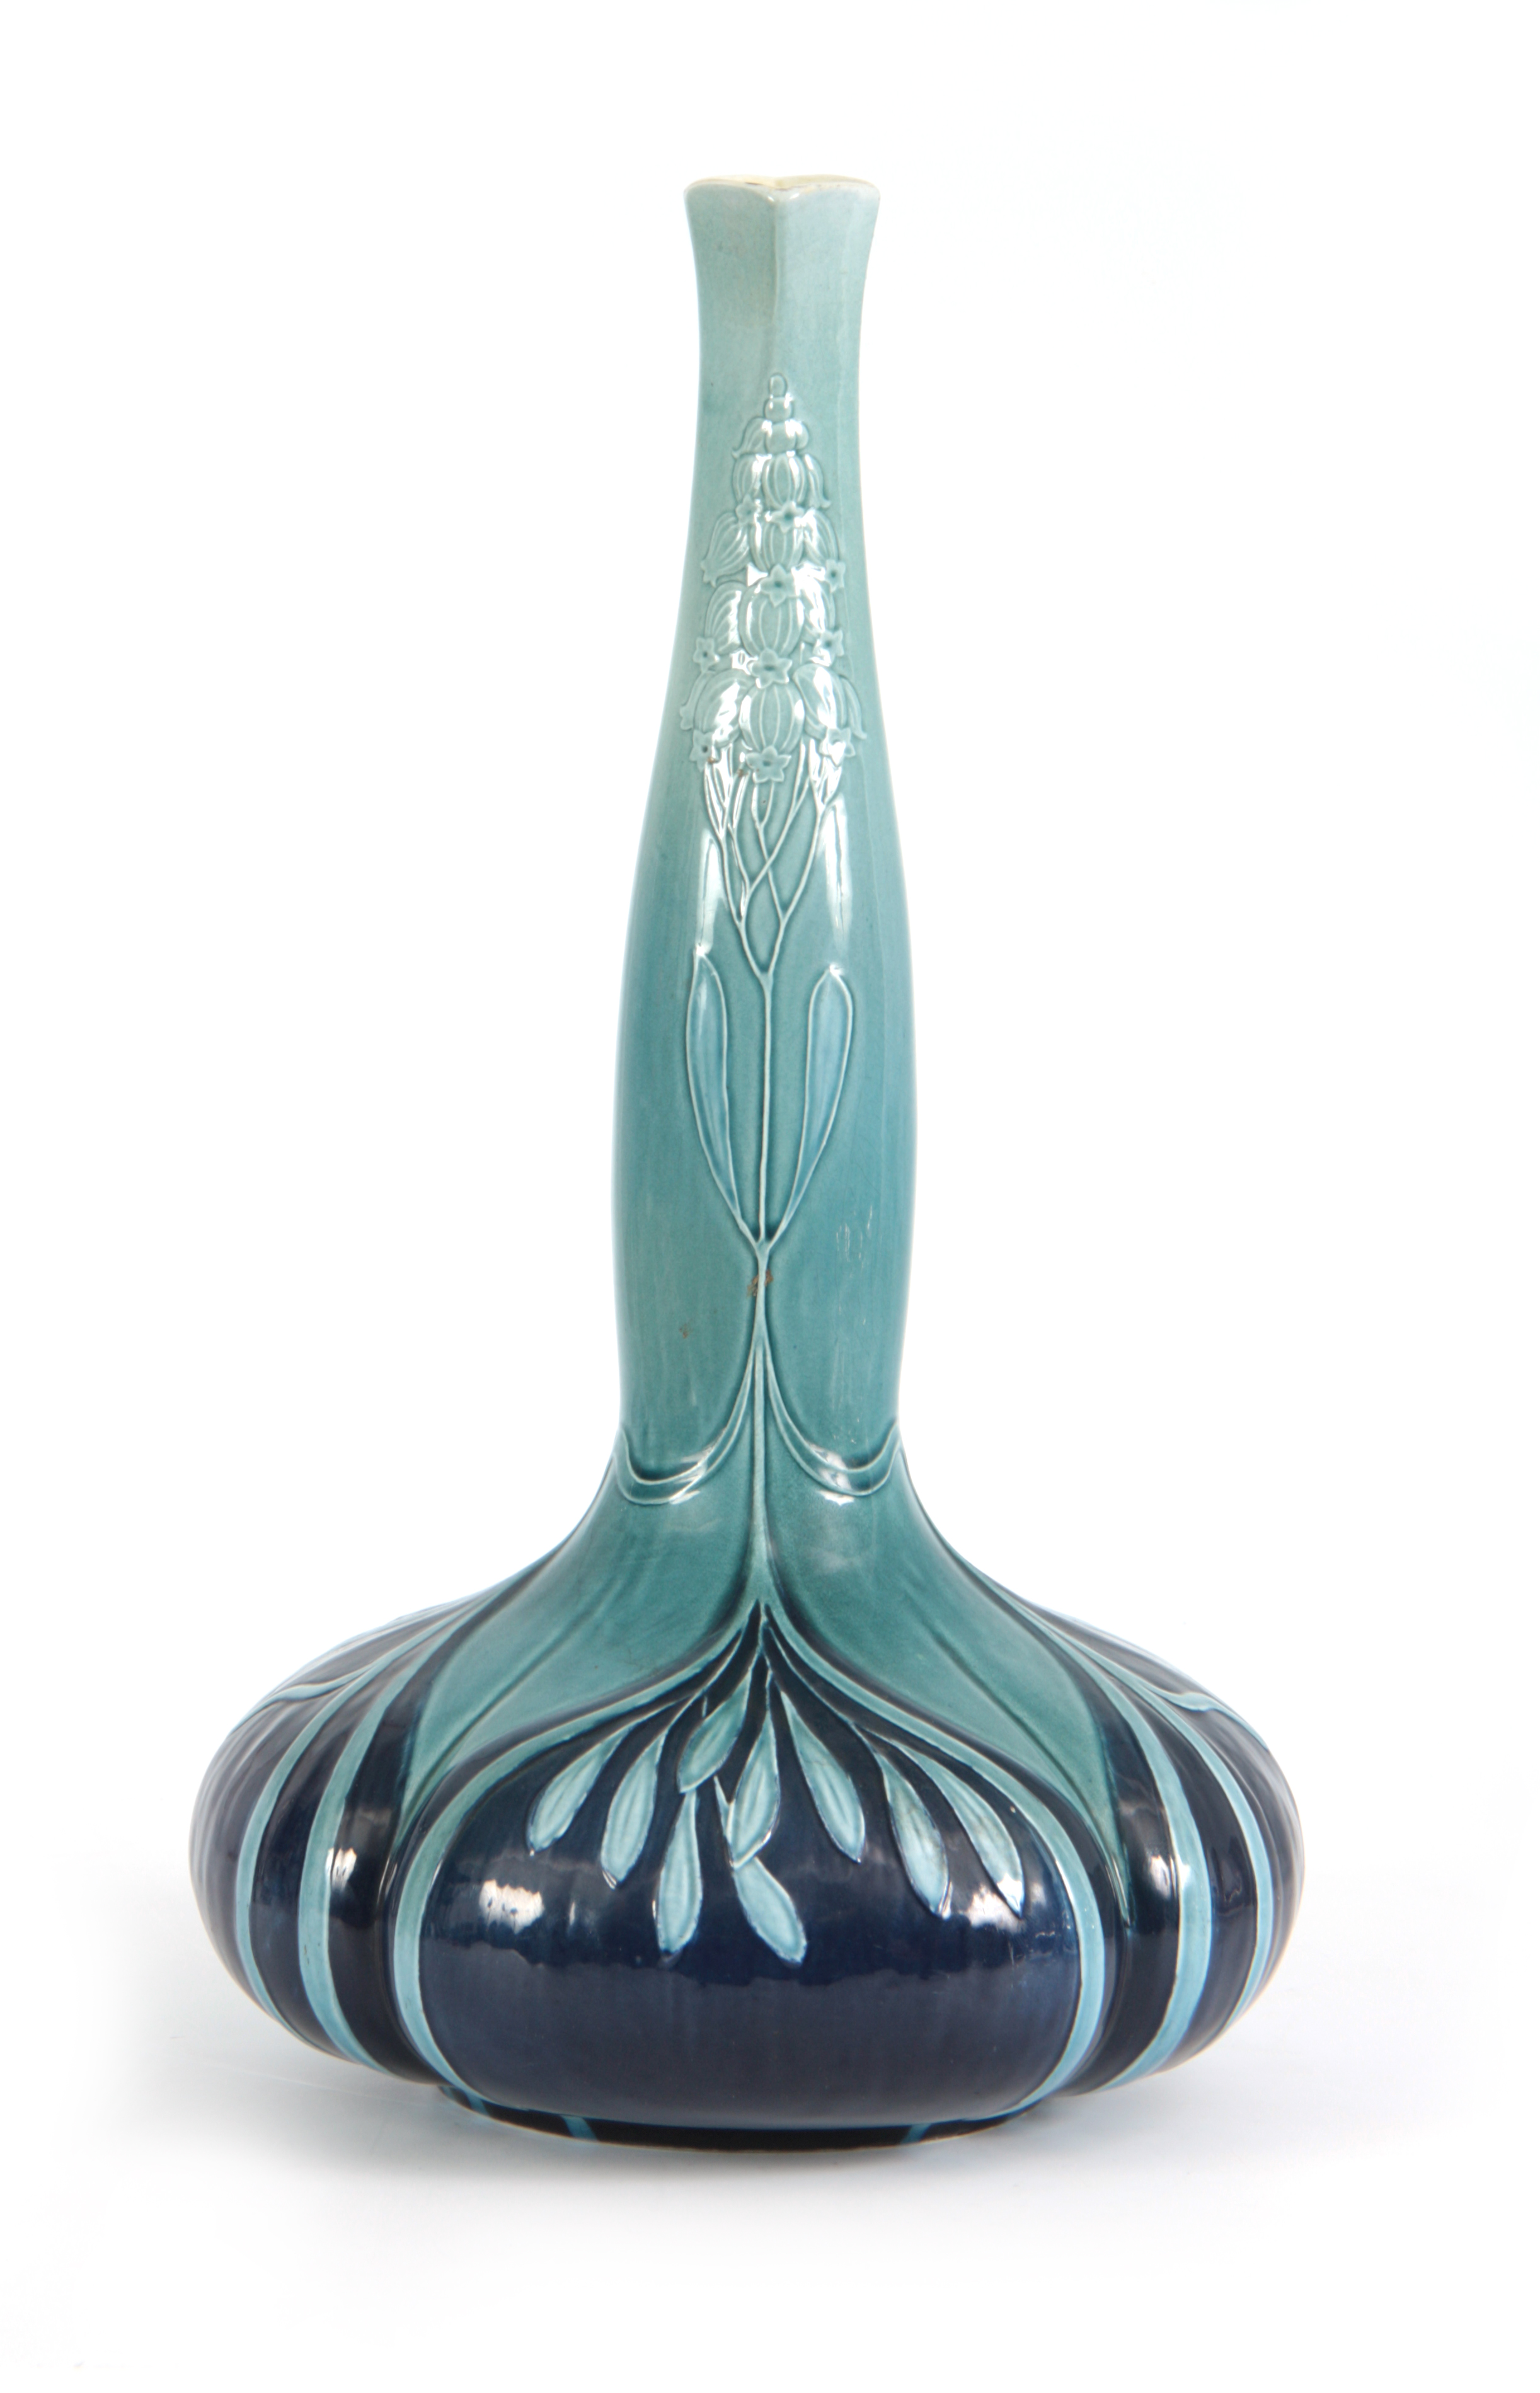 AN EARLY 20TH CENTURY VILLEROY AND BOCH ART NOUVEAU VASE with tube lined decoration having